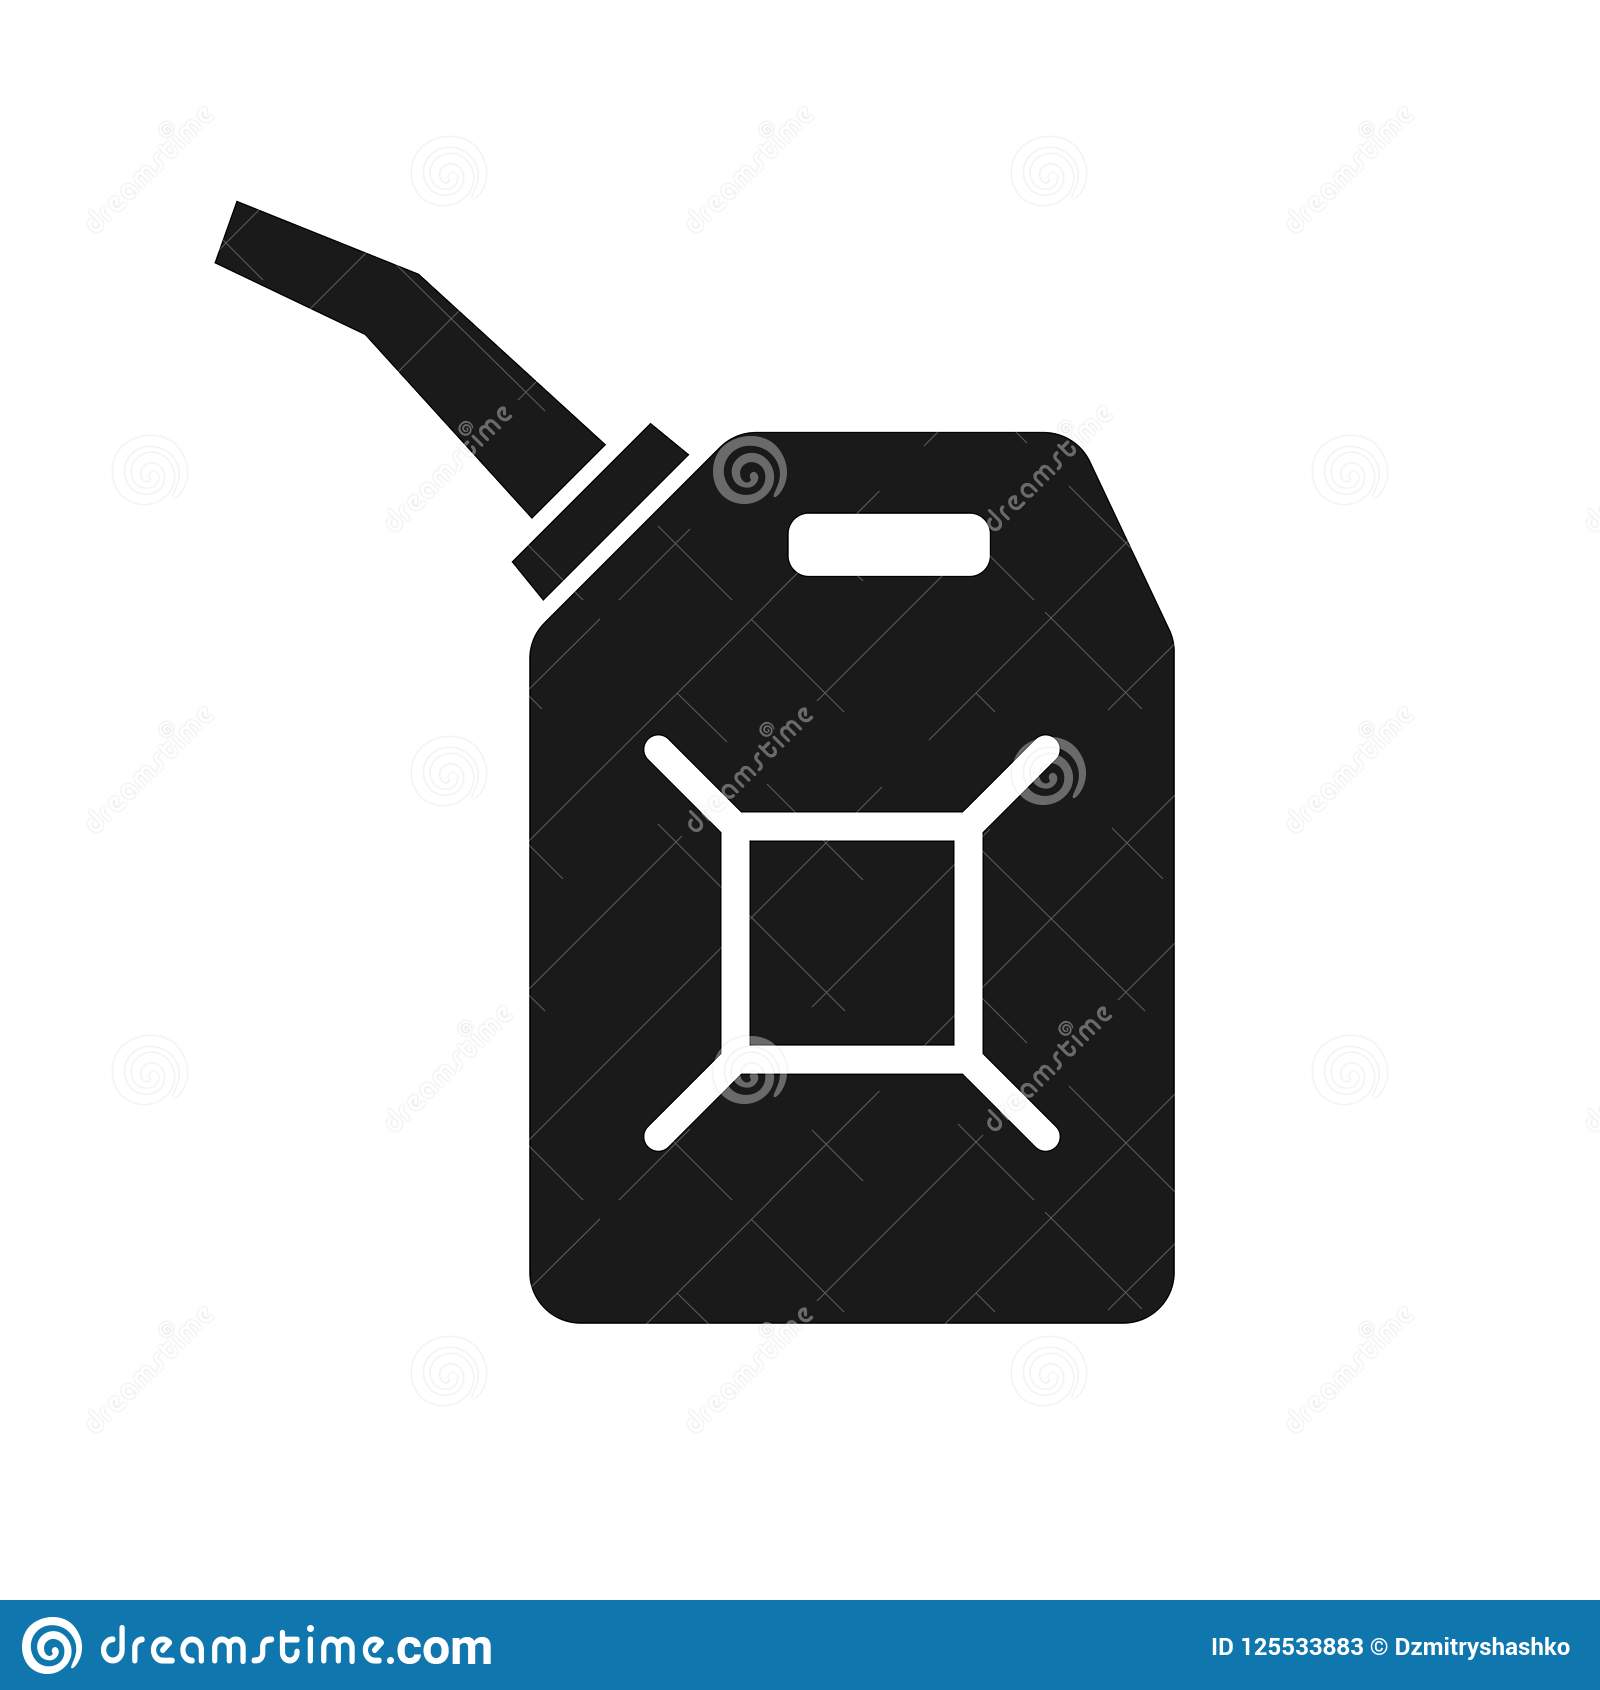 Canister of gasoline icon stock vector. Illustration of energy.